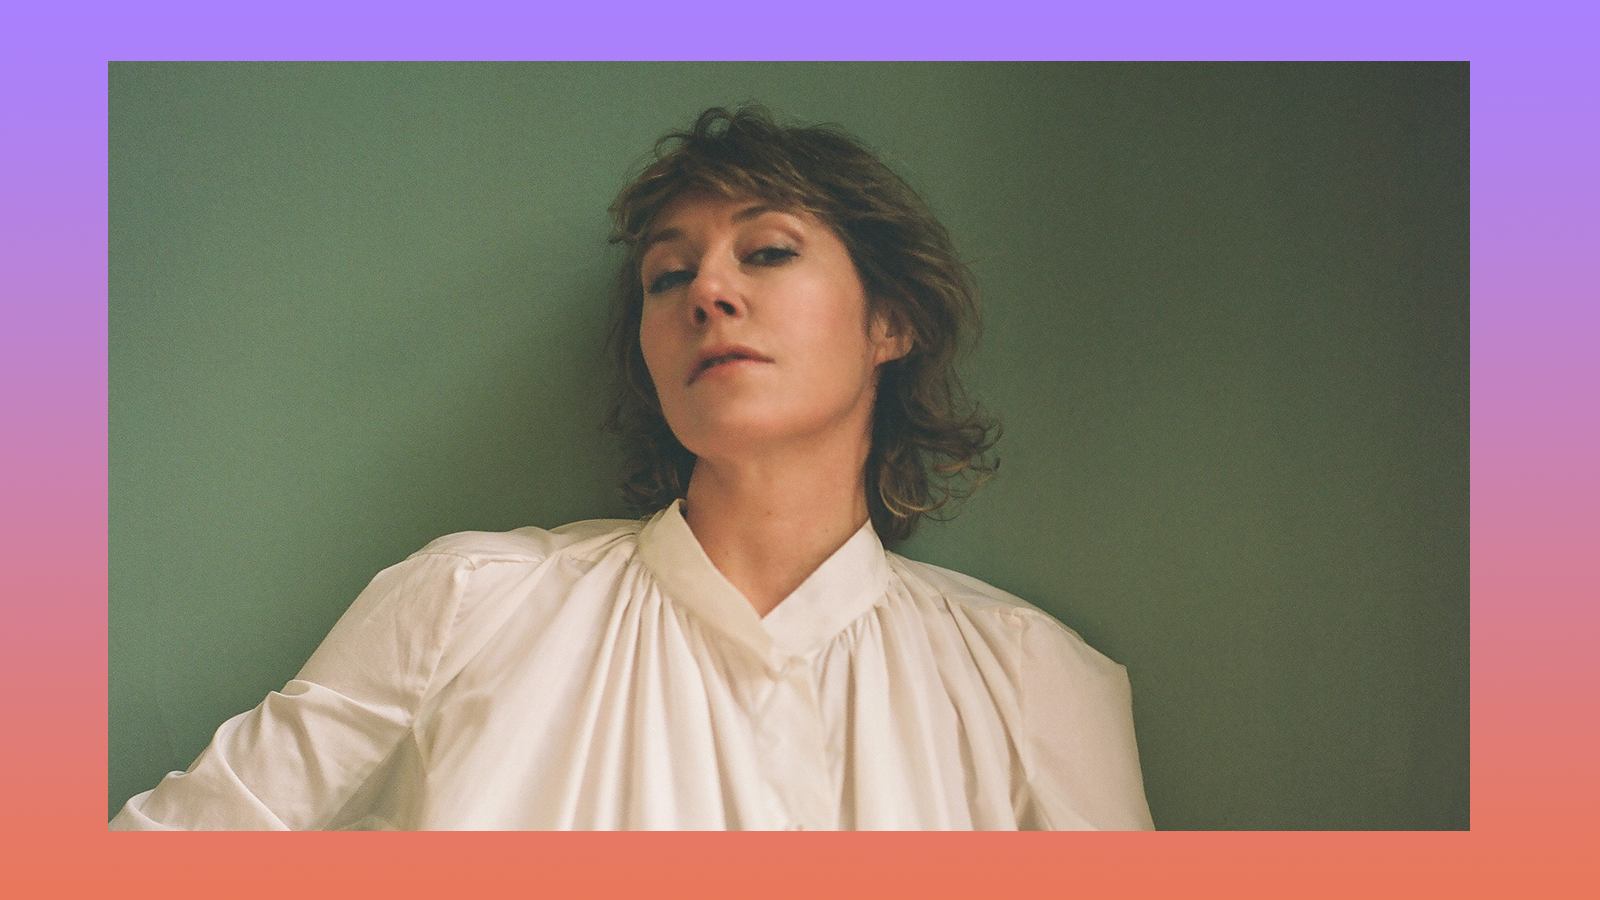 Martha Wainwright, in white blouse, tilts her head back and stares into the camera